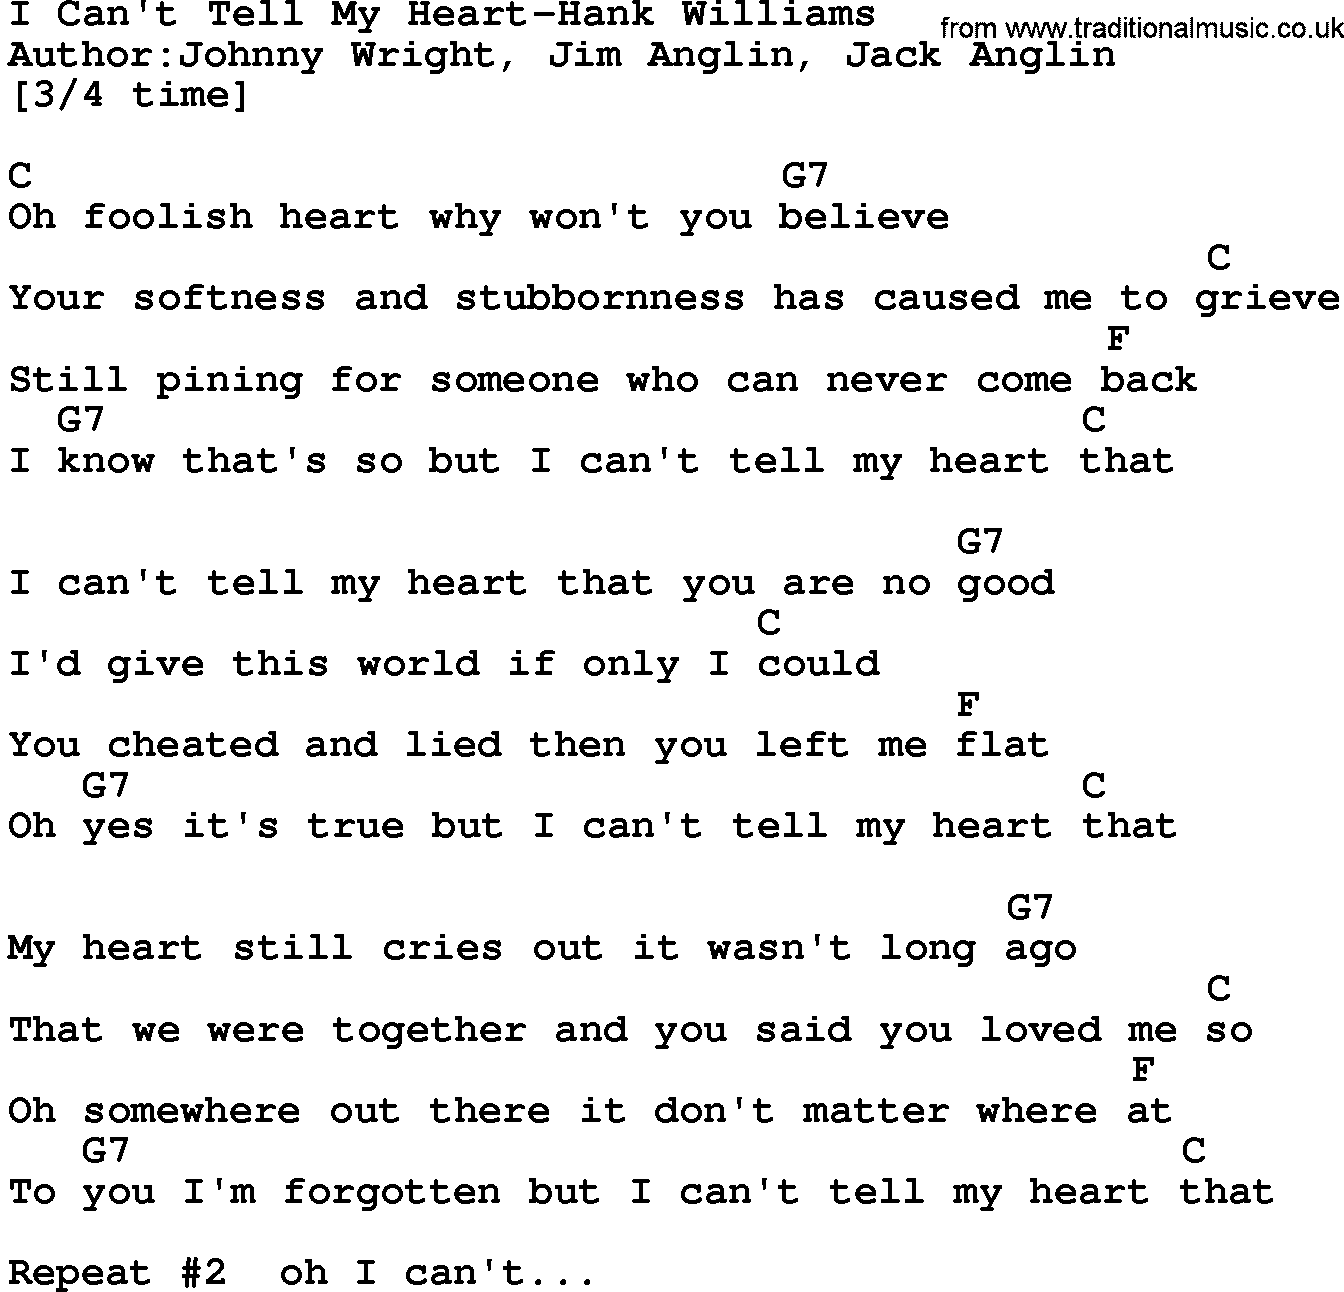 Country music song: I Can't Tell My Heart-Hank Williams lyrics and chords